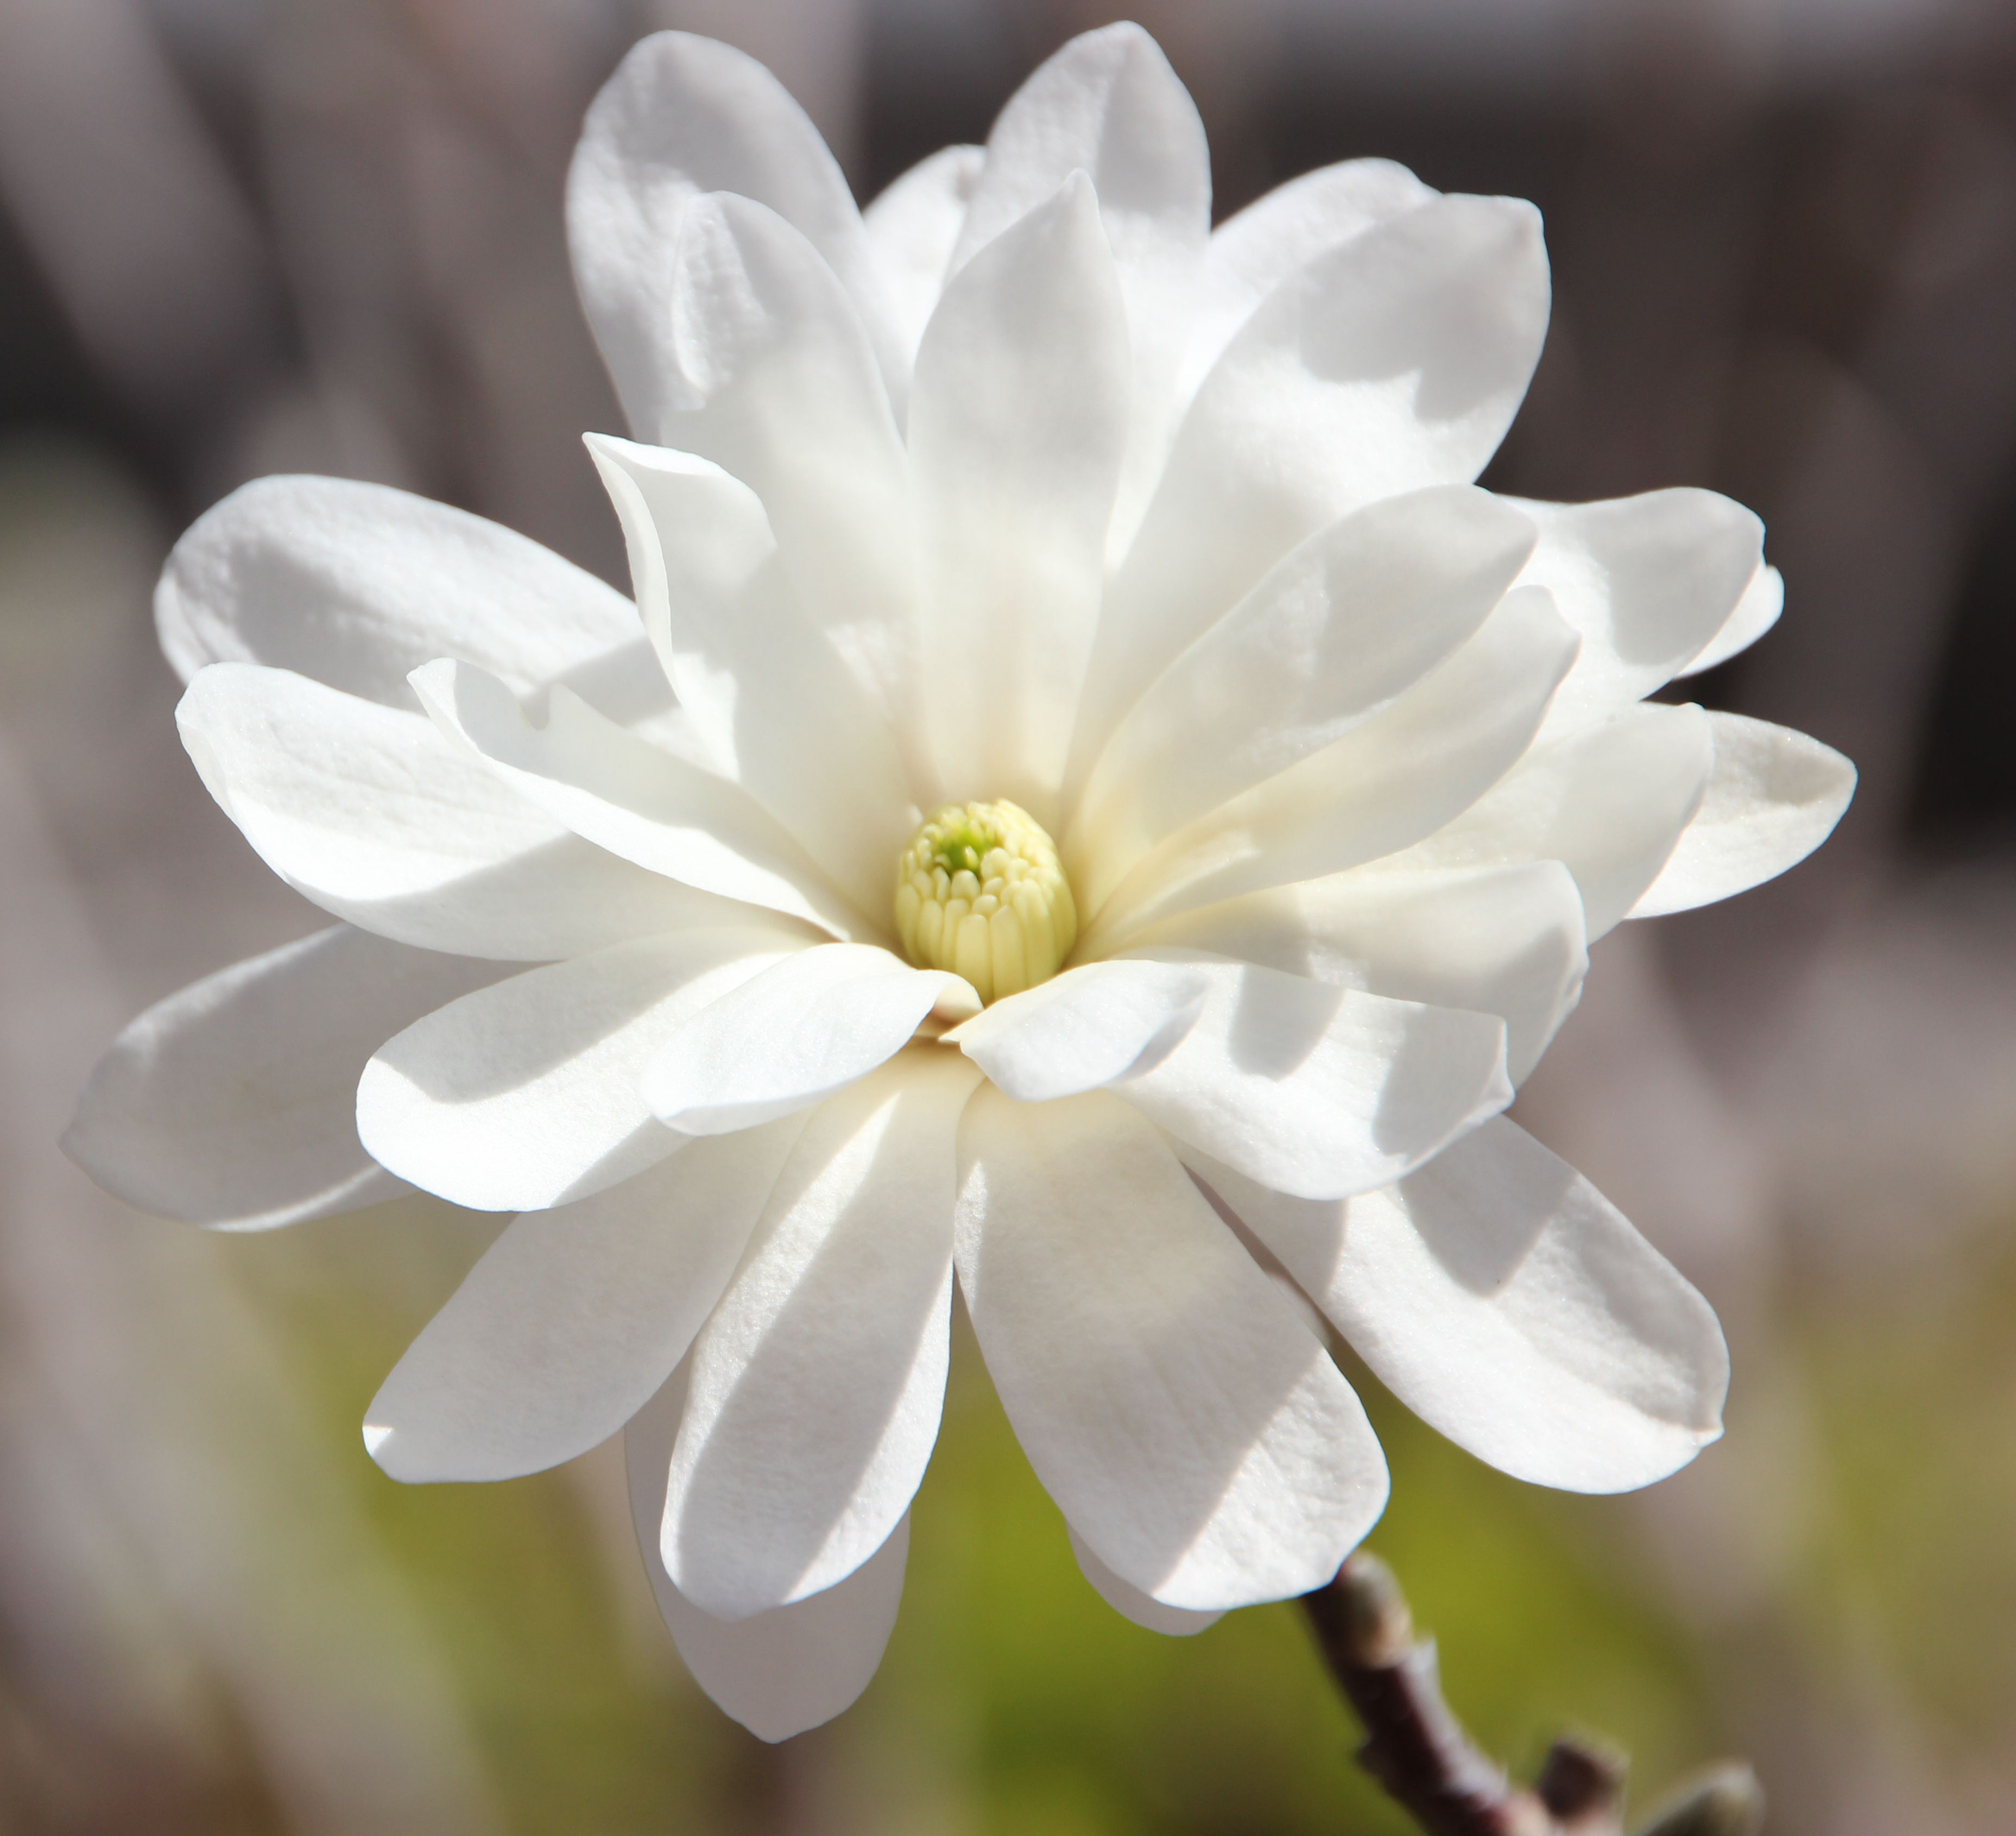 Bright white flower with delicate yellow center